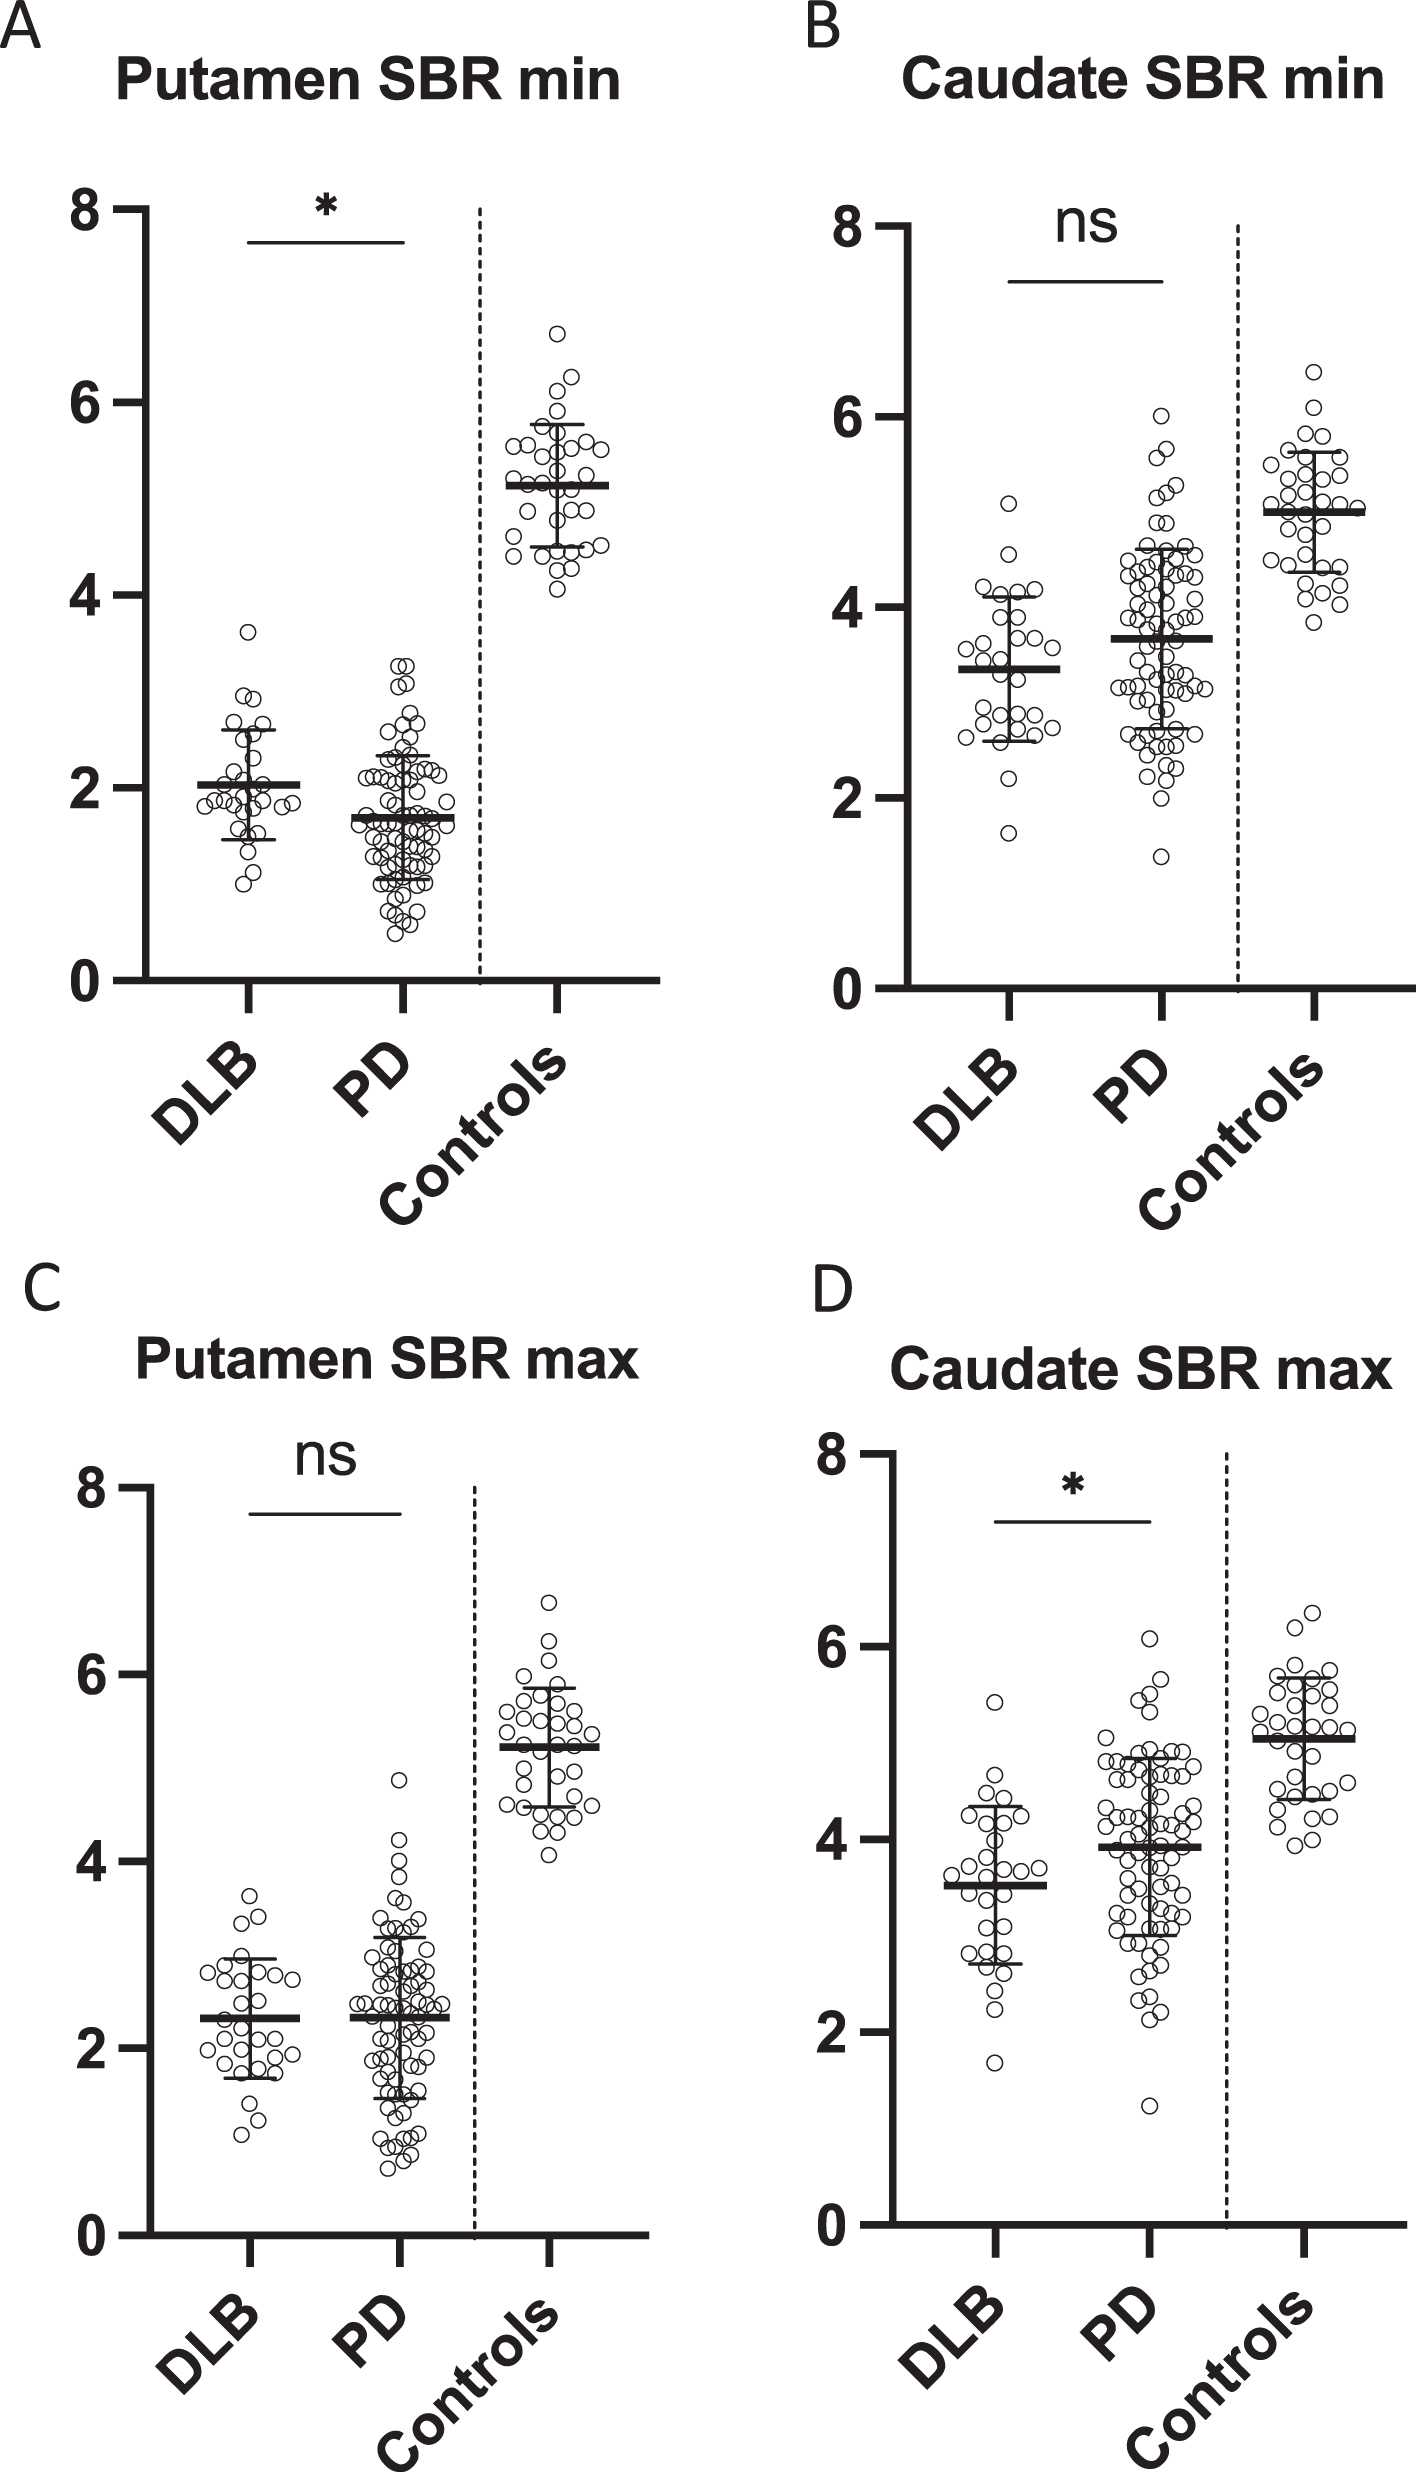 Most affected specific binding ratio in A) putamen and B) caudate in DLB patients, PD patients, and controls. Least affected specific binding ratio in D) putamen and E) caudate in DLB patients, PD patients, and controls. Data is presented as mean±SD. *p < 0.05. ns, non-significant; SBR, specific binding ratio.